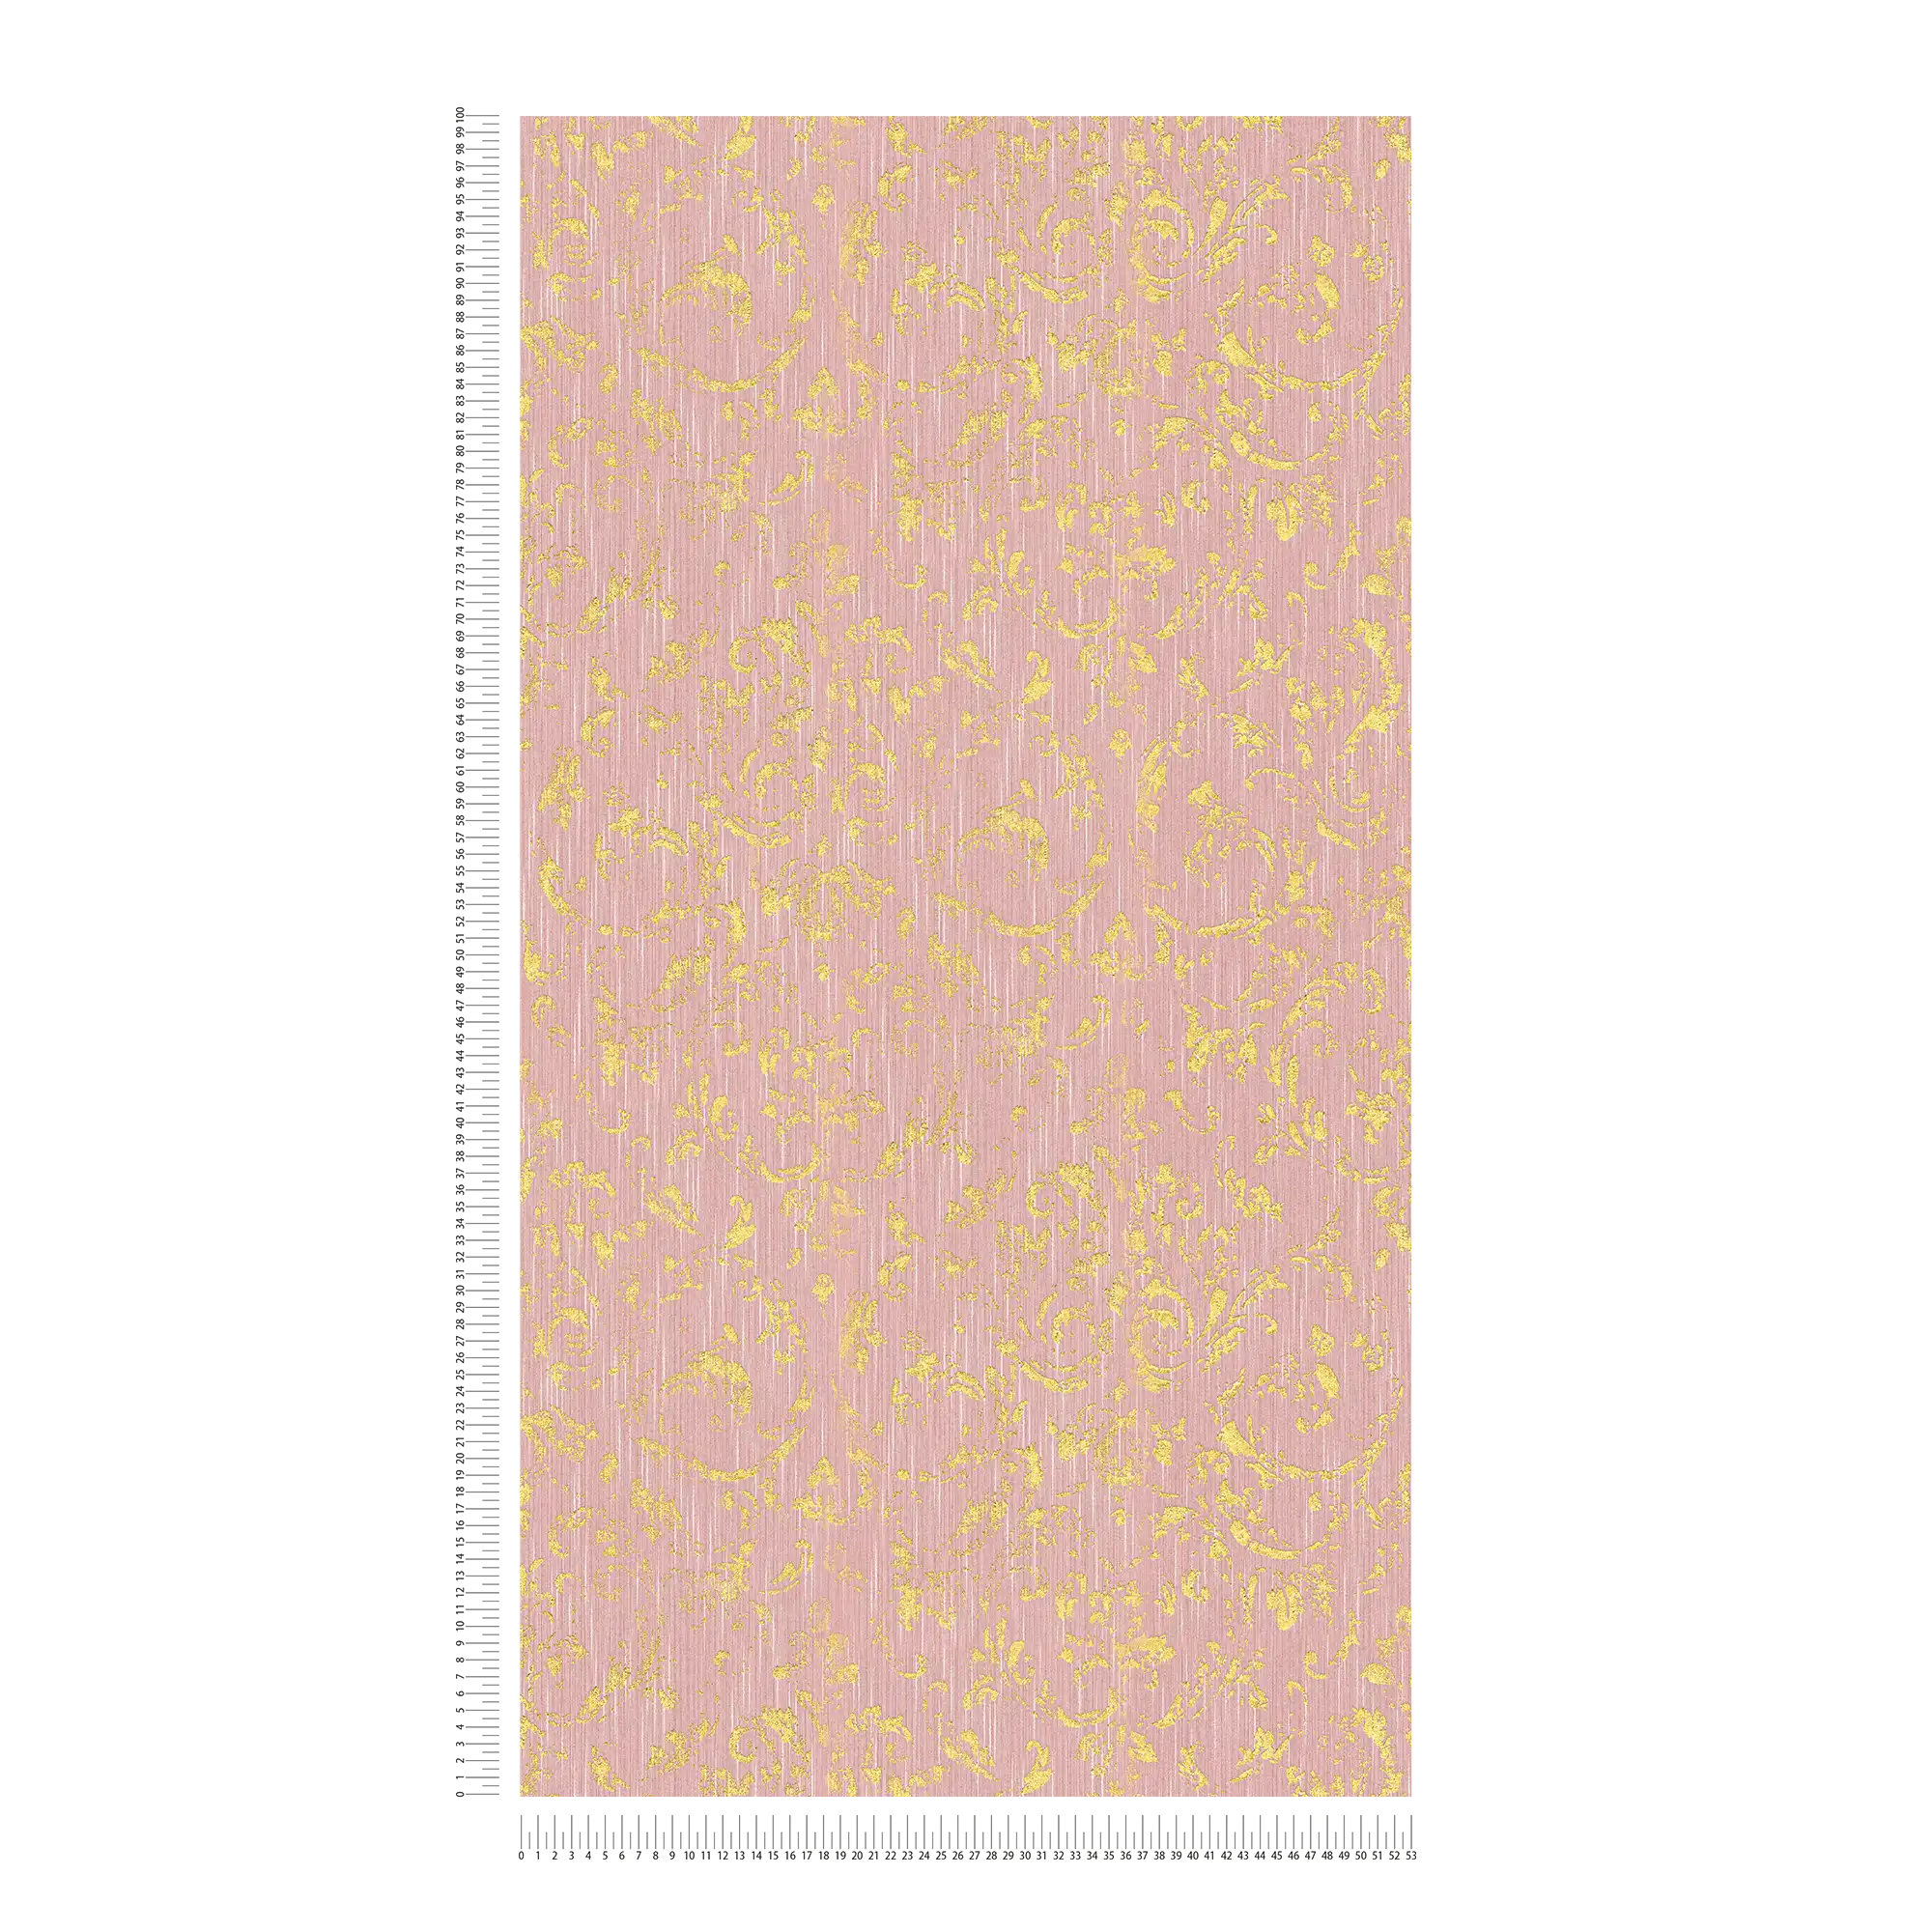             Wallpaper with gold ornaments in used look - pink, gold
        